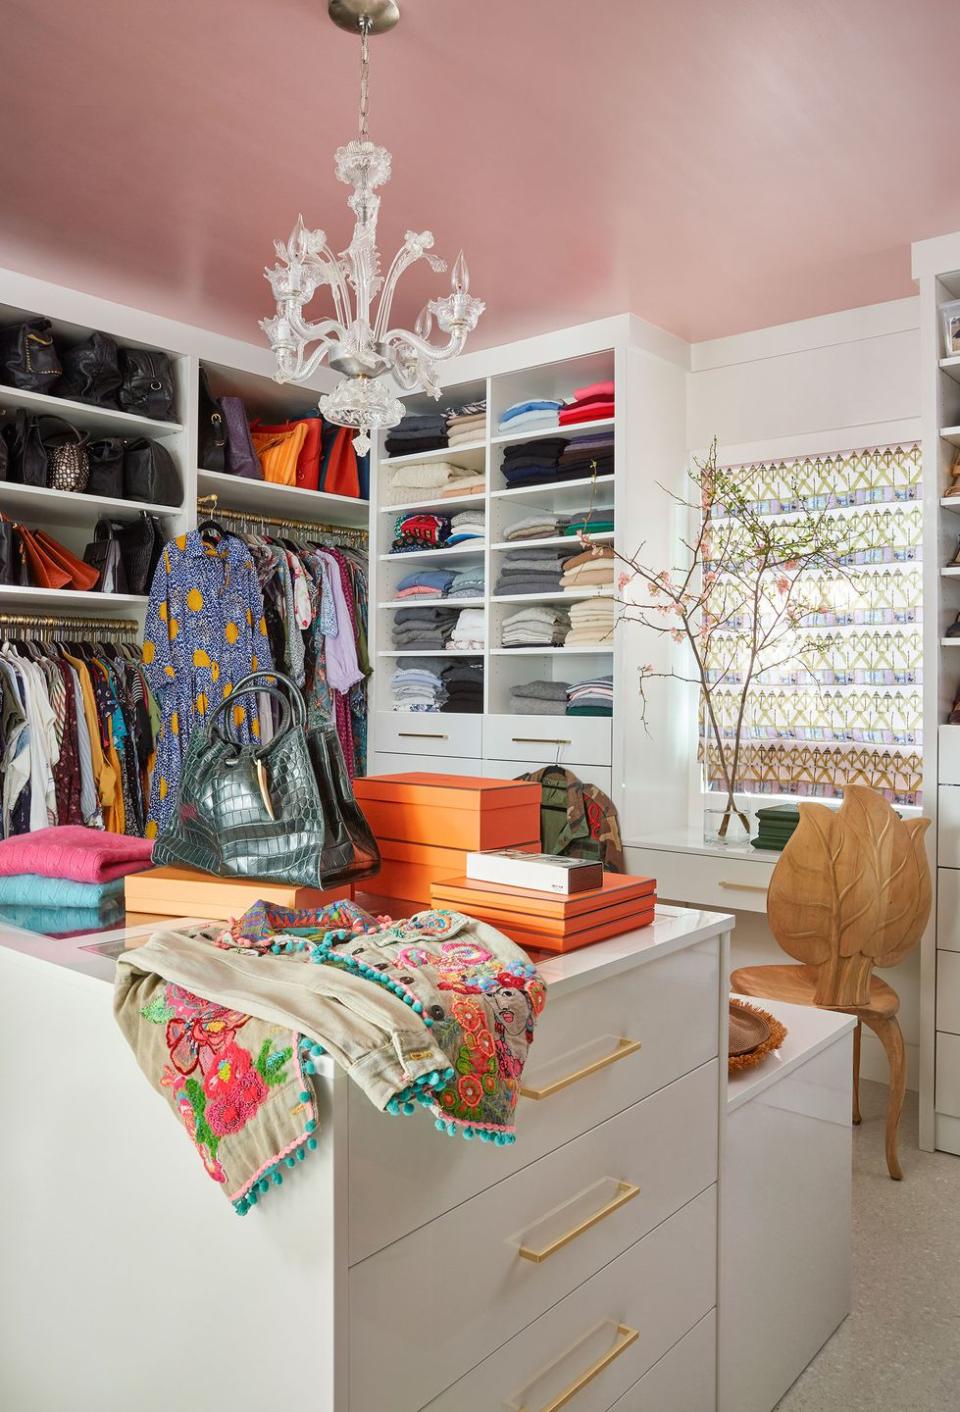 walk in closet with a leaf back chair next to a window and lots of white drawers and shelving for clothes and a colorful jacket with blue pompoms draped over the drawers in the foreground as well as a archive boxes and other clothes